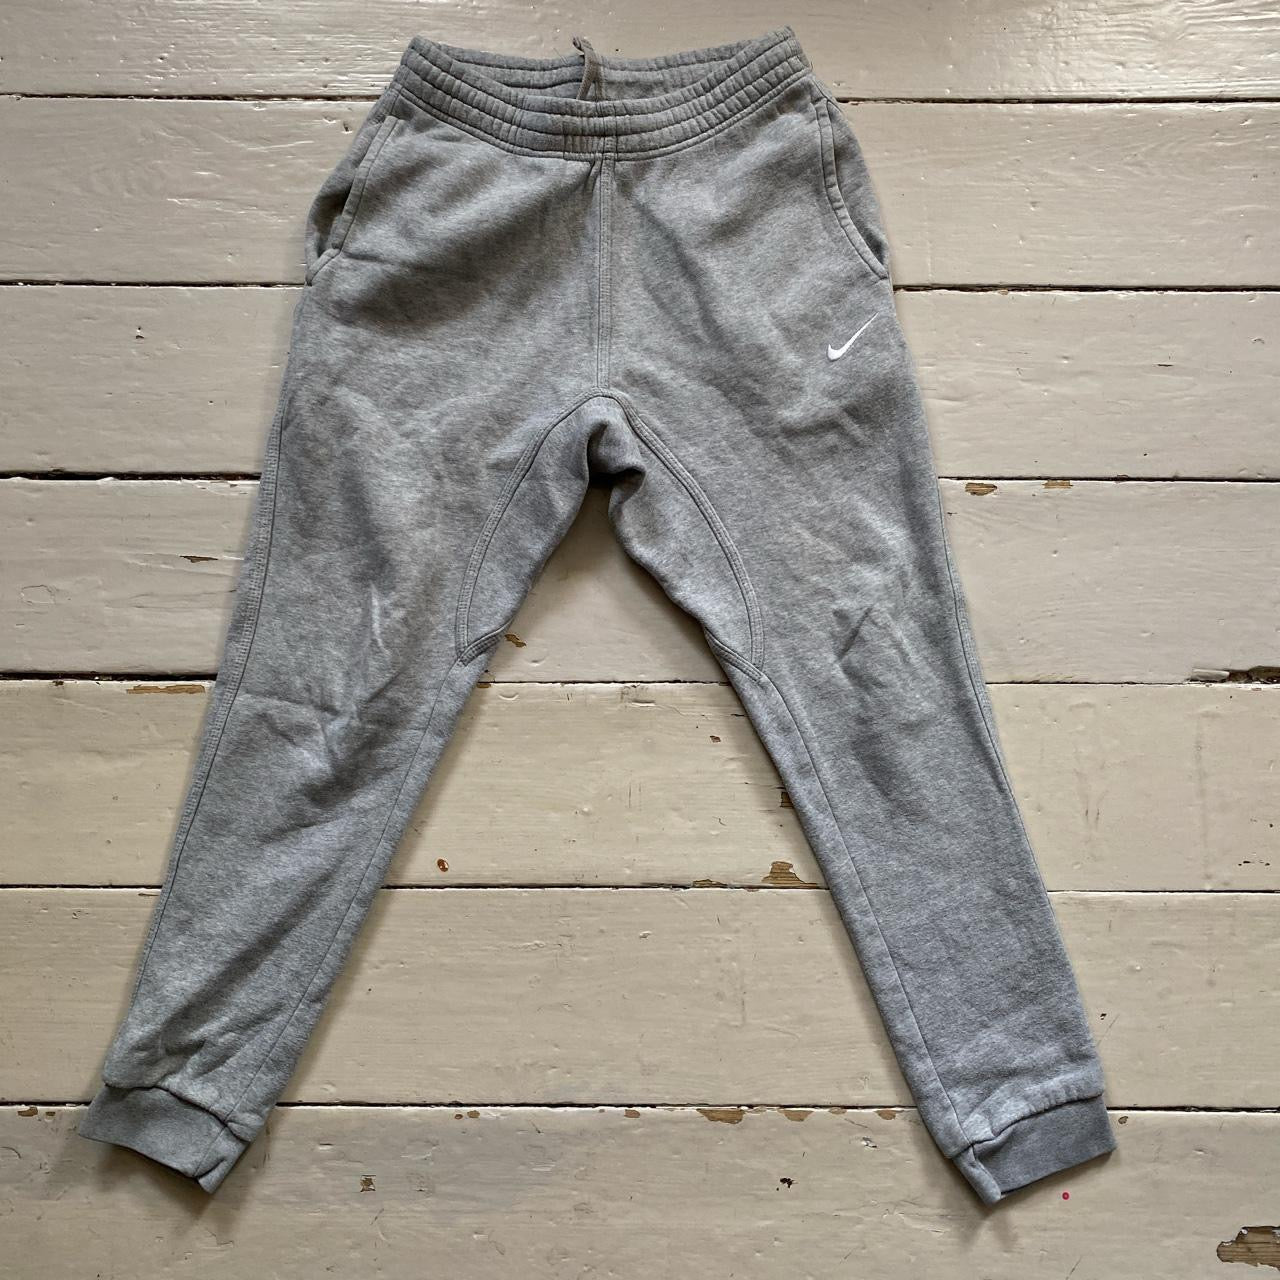 Nike Swoosh Grey and White Joggers (Small)